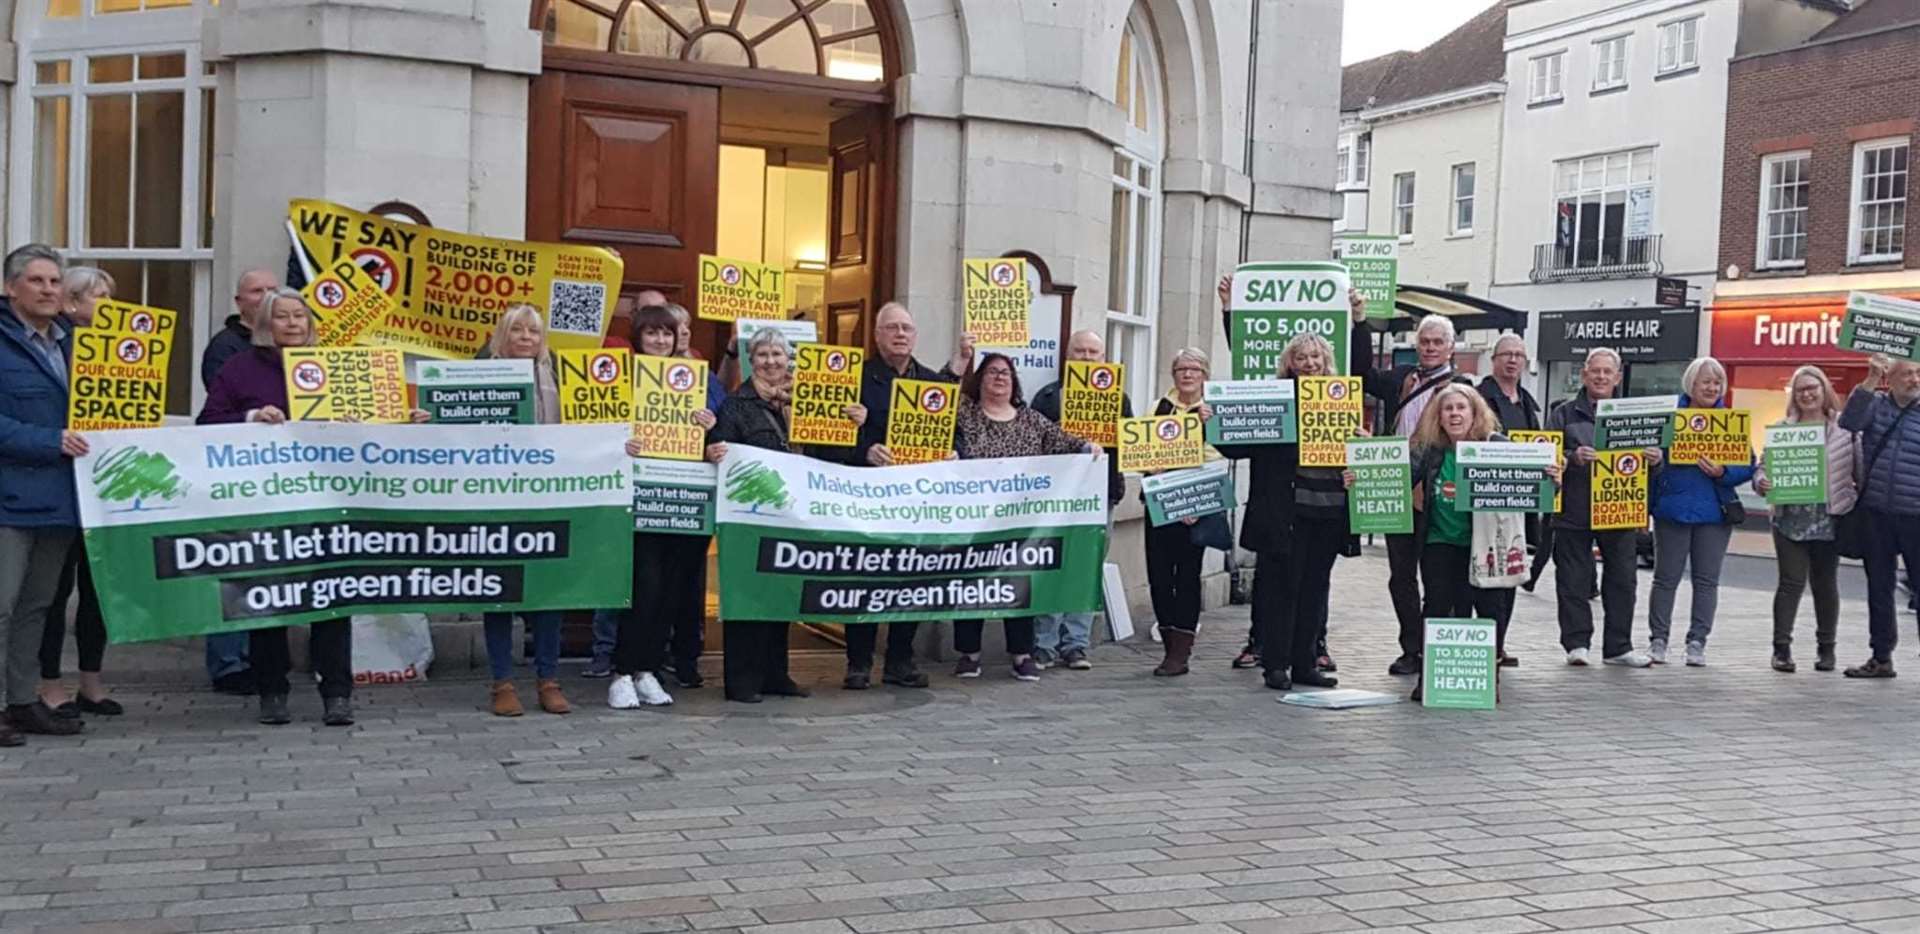 Protestors campaigning against the Lidsing development, outside Maidstone Town Hall in March